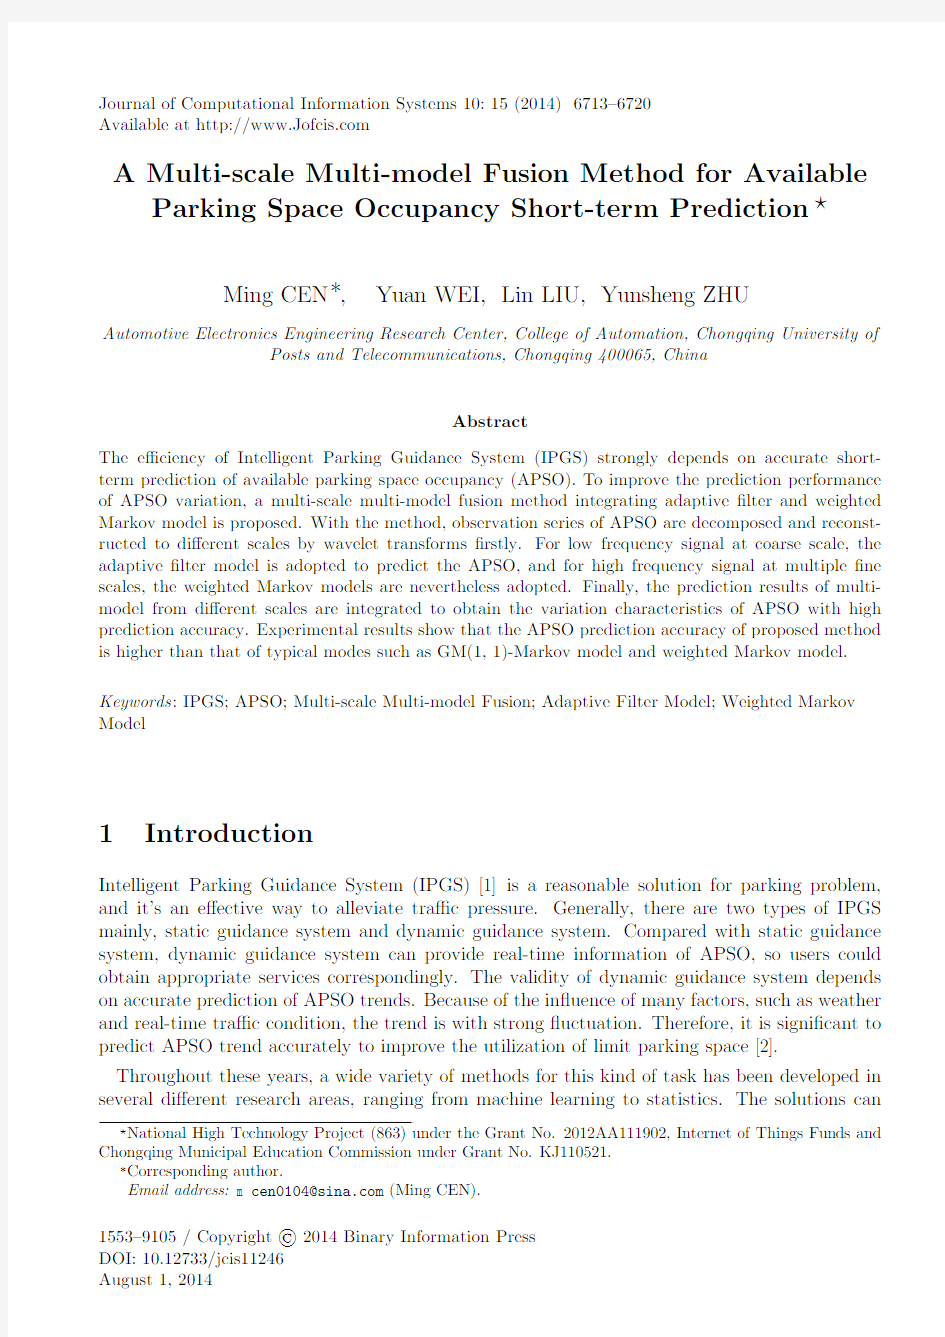 A Multi-Scale Multi-Model Fusion Method for Available Parking Space Occupancy Short-term Prediction